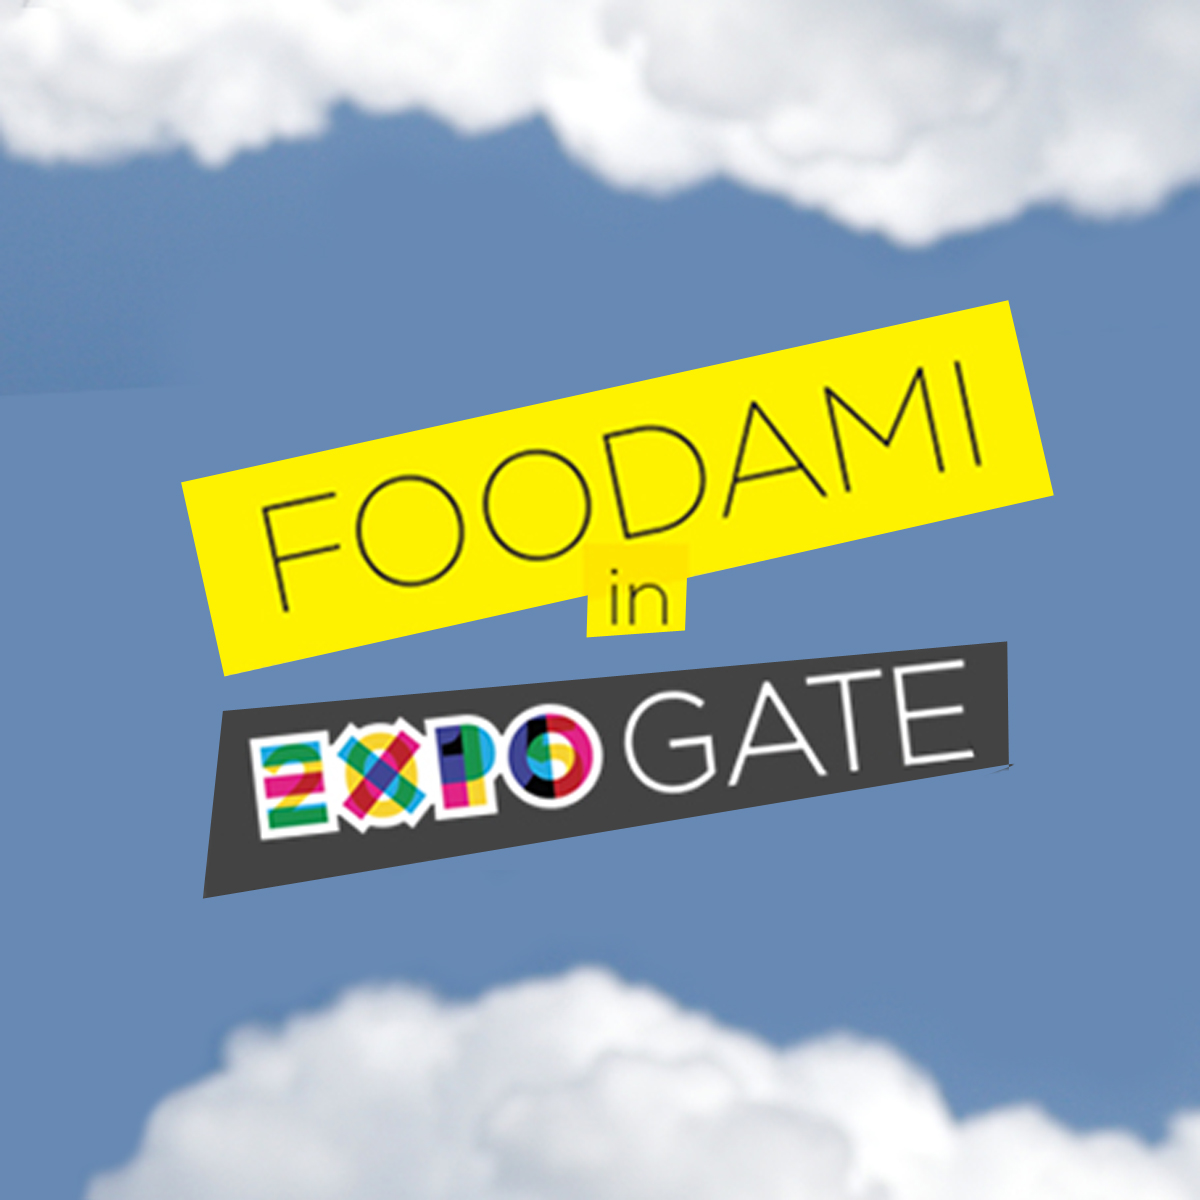 “a tsunami of food, food you love and food in Milan”